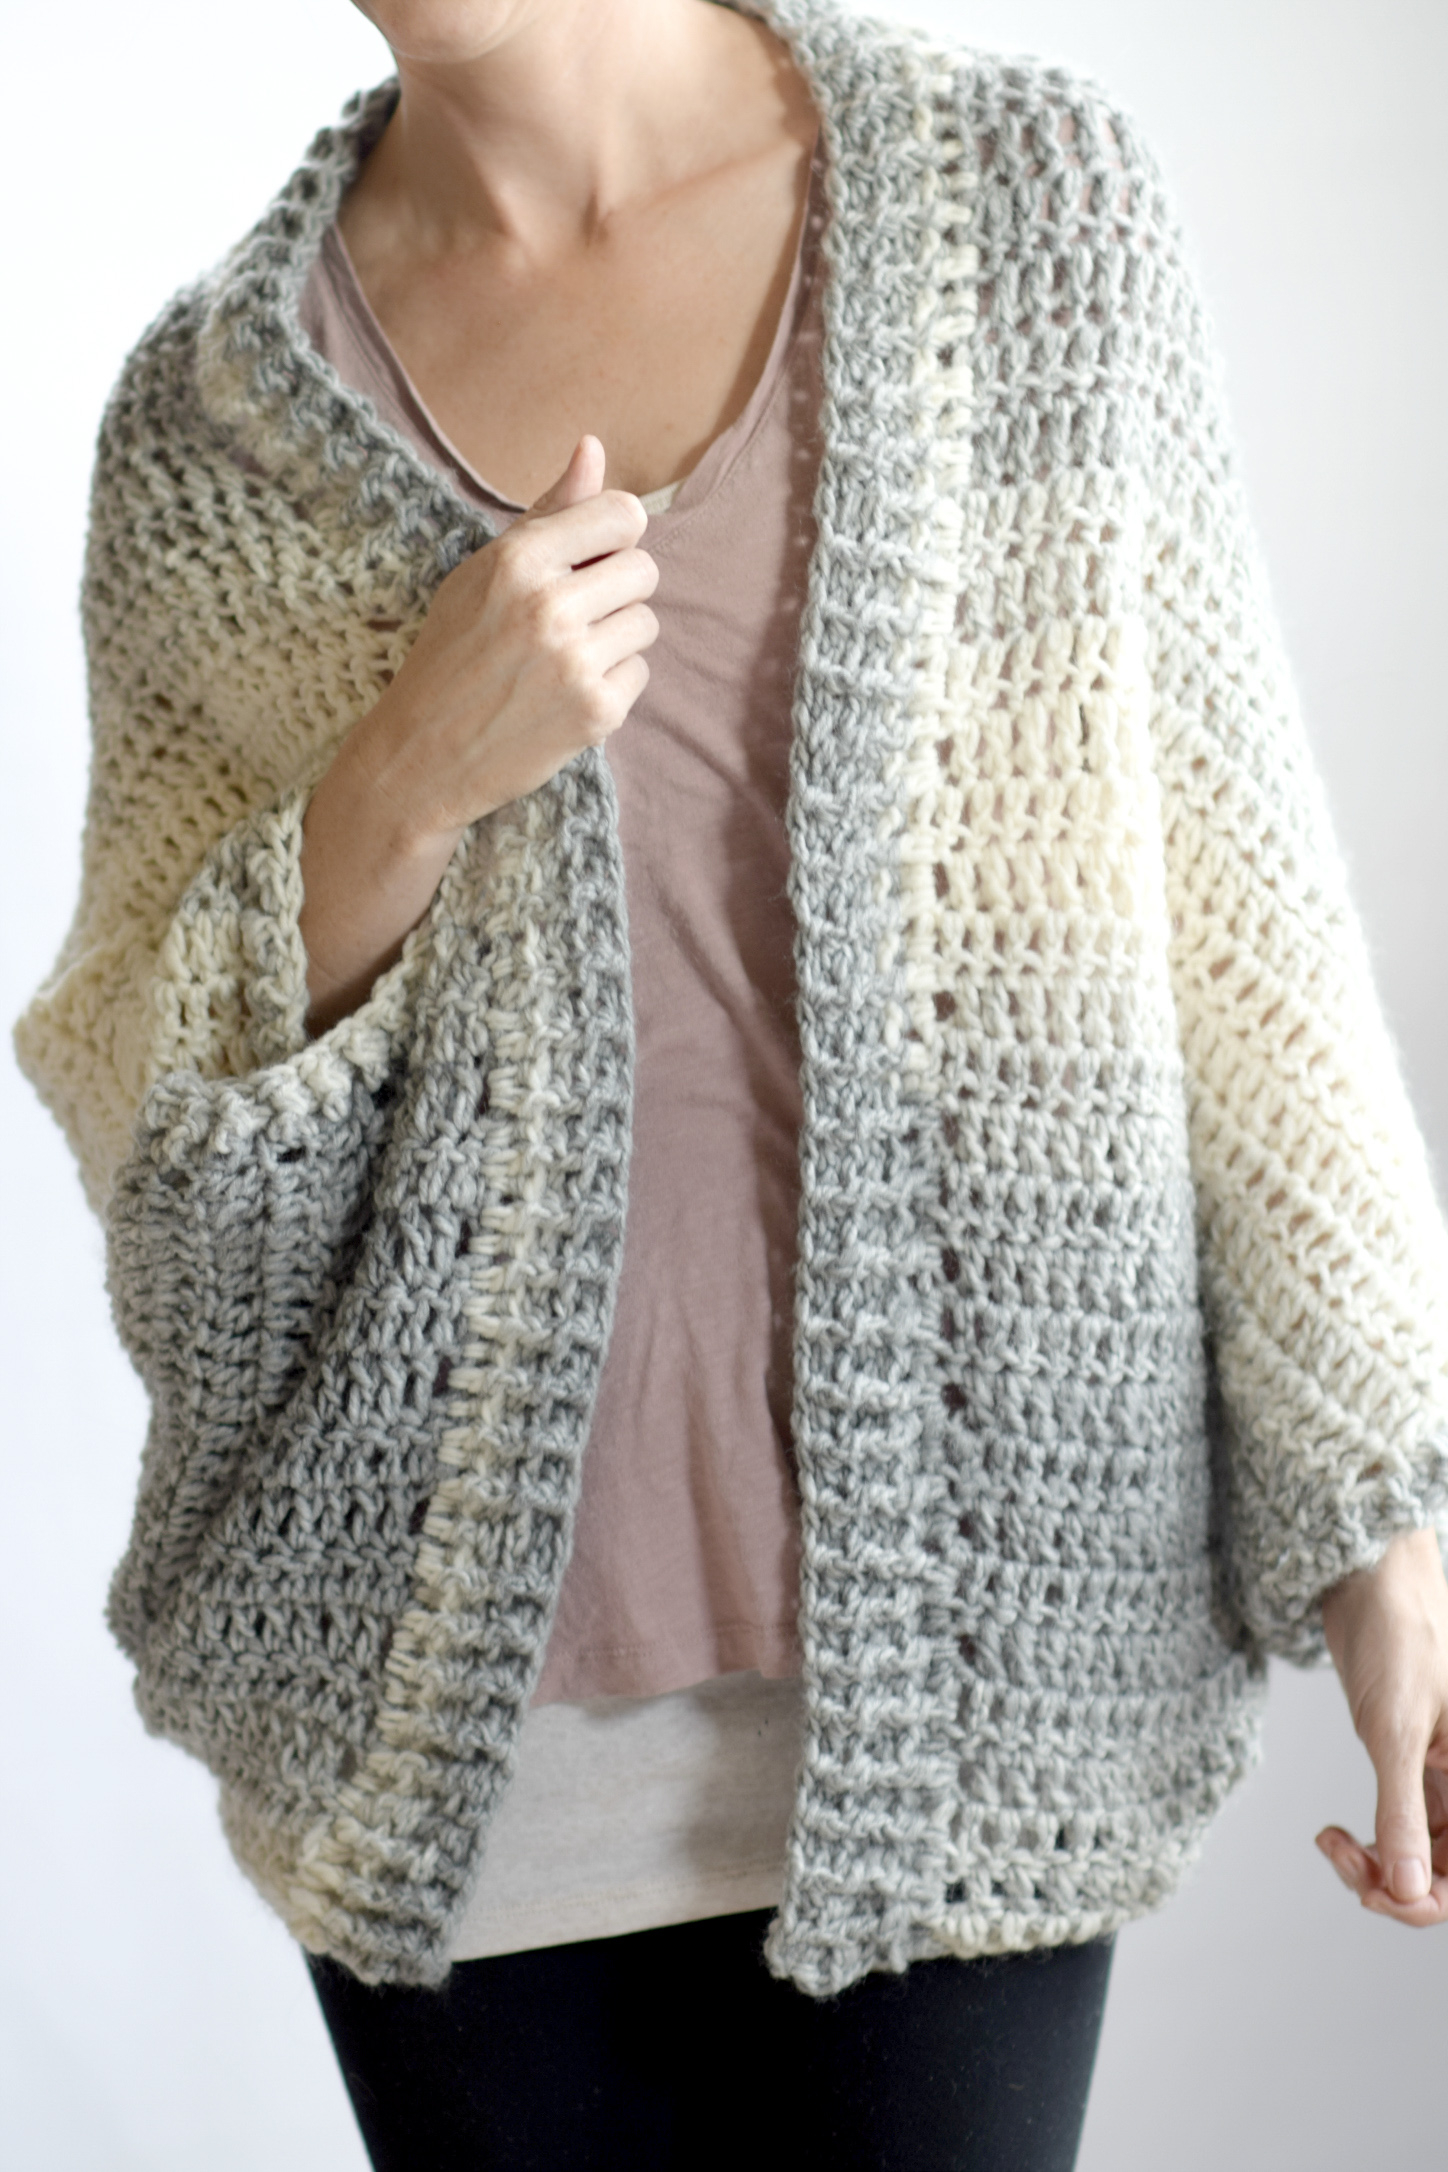 Knit And Crochet Now Patterns Done In A Day Quick Shrug Crochet Pattern Mama In A Stitch